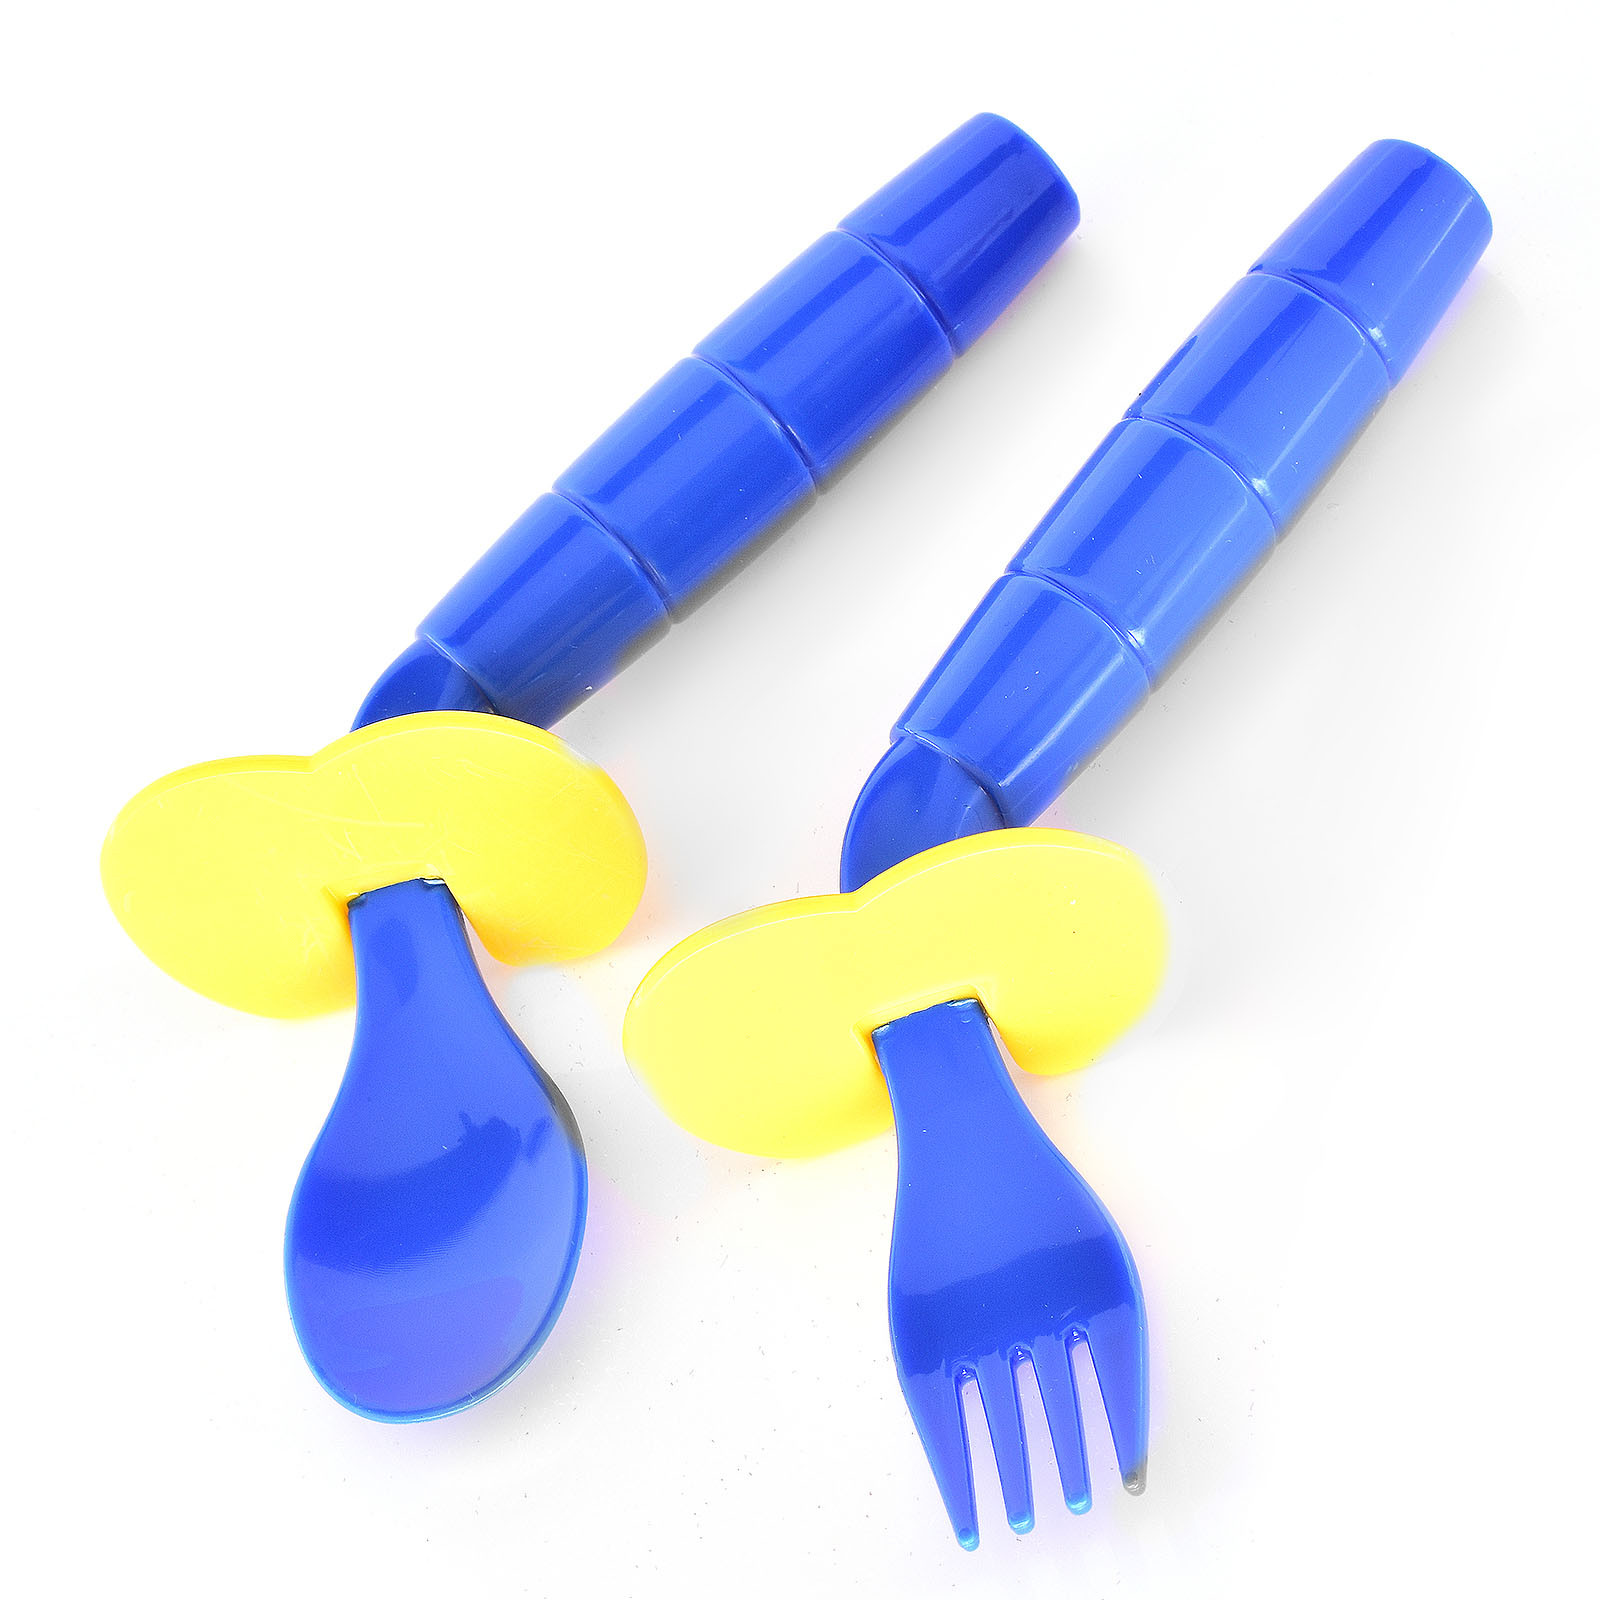 Thumbnail of RIGHT EasieEaters Curved Utensils with shield - Public School Use.